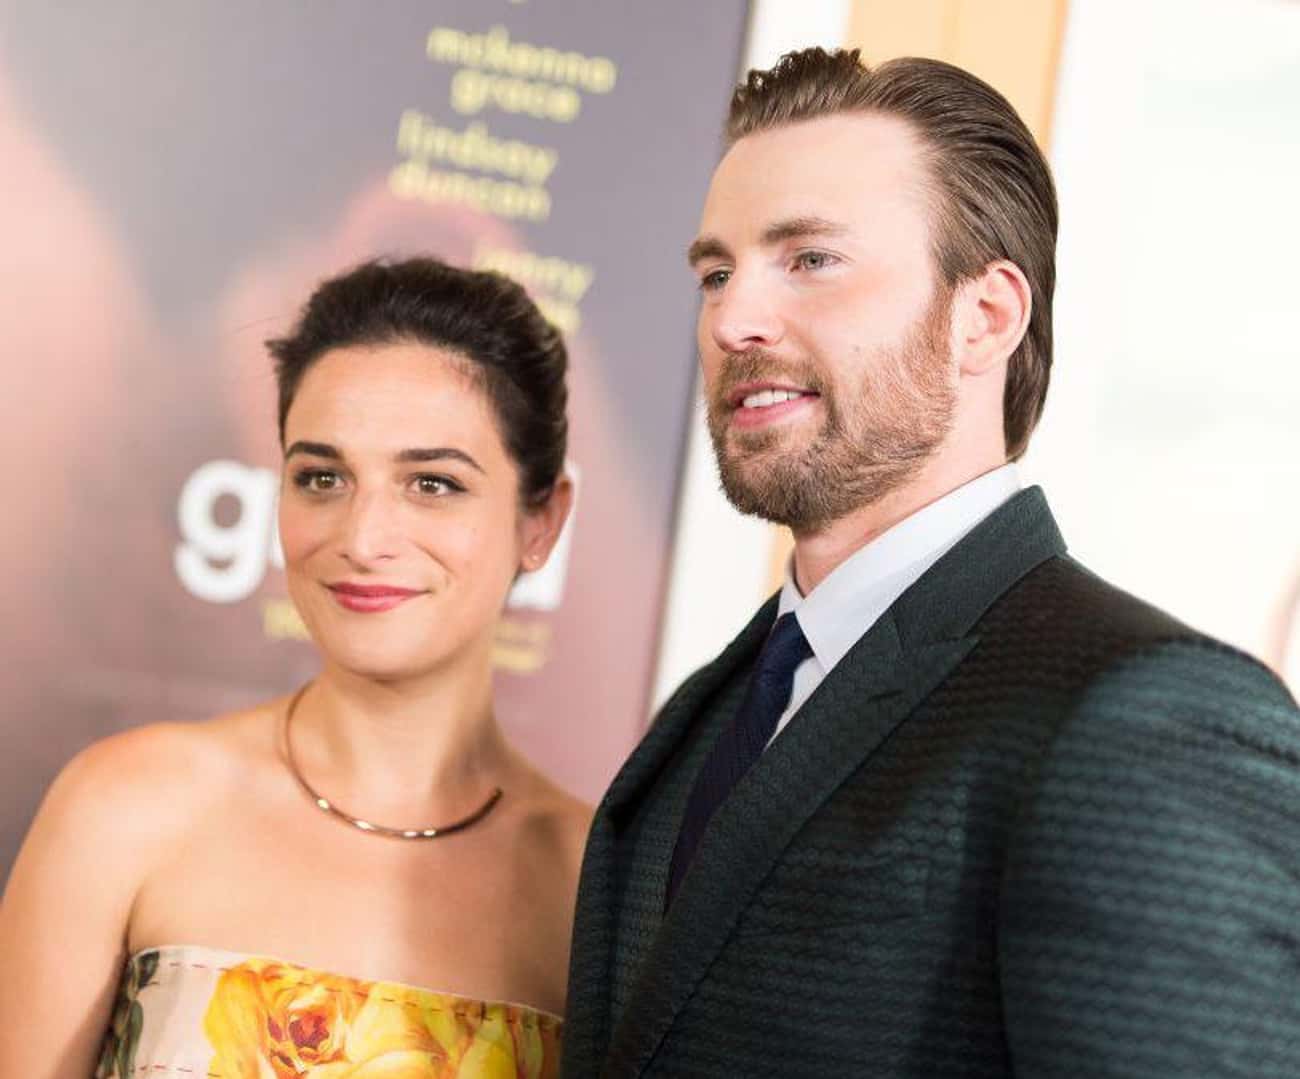 Who Has Chris Evans Dated? | List of Chris Evans Dating History with Photos